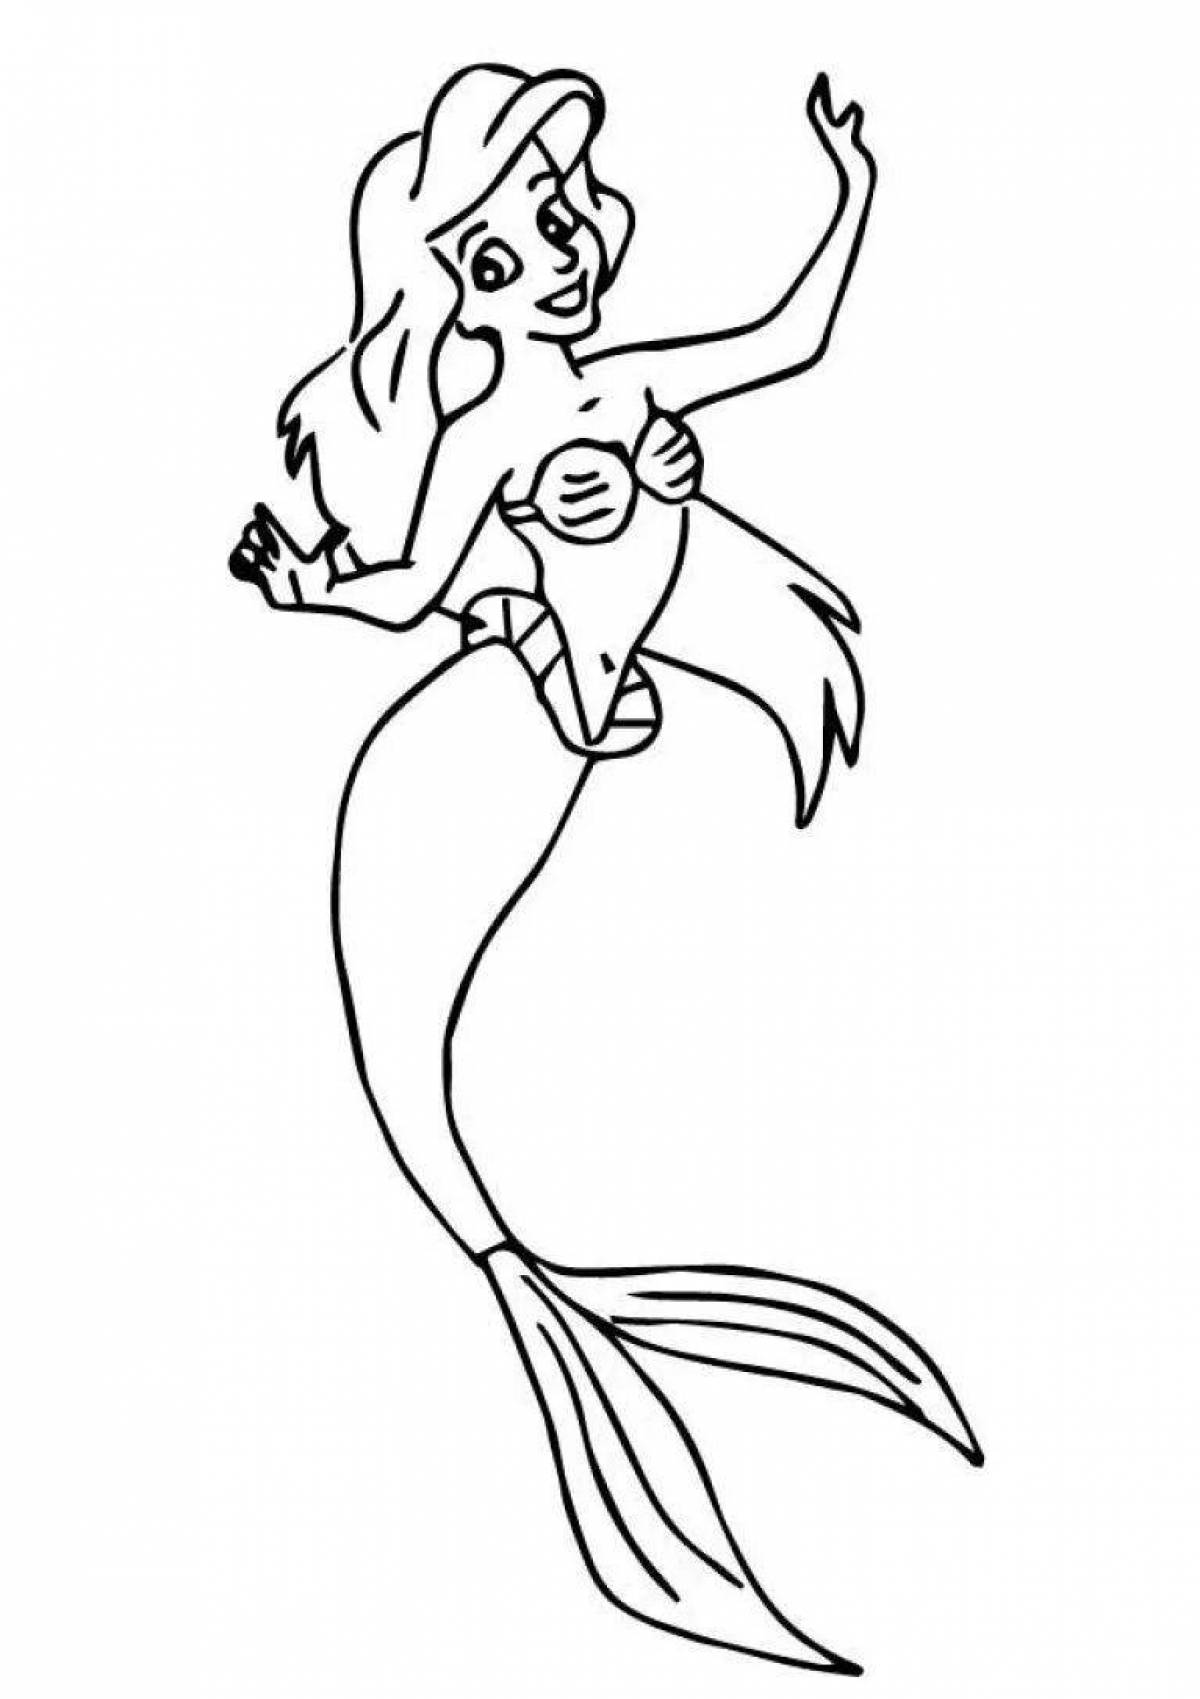 Exotic coloring book ariel the little mermaid for kids